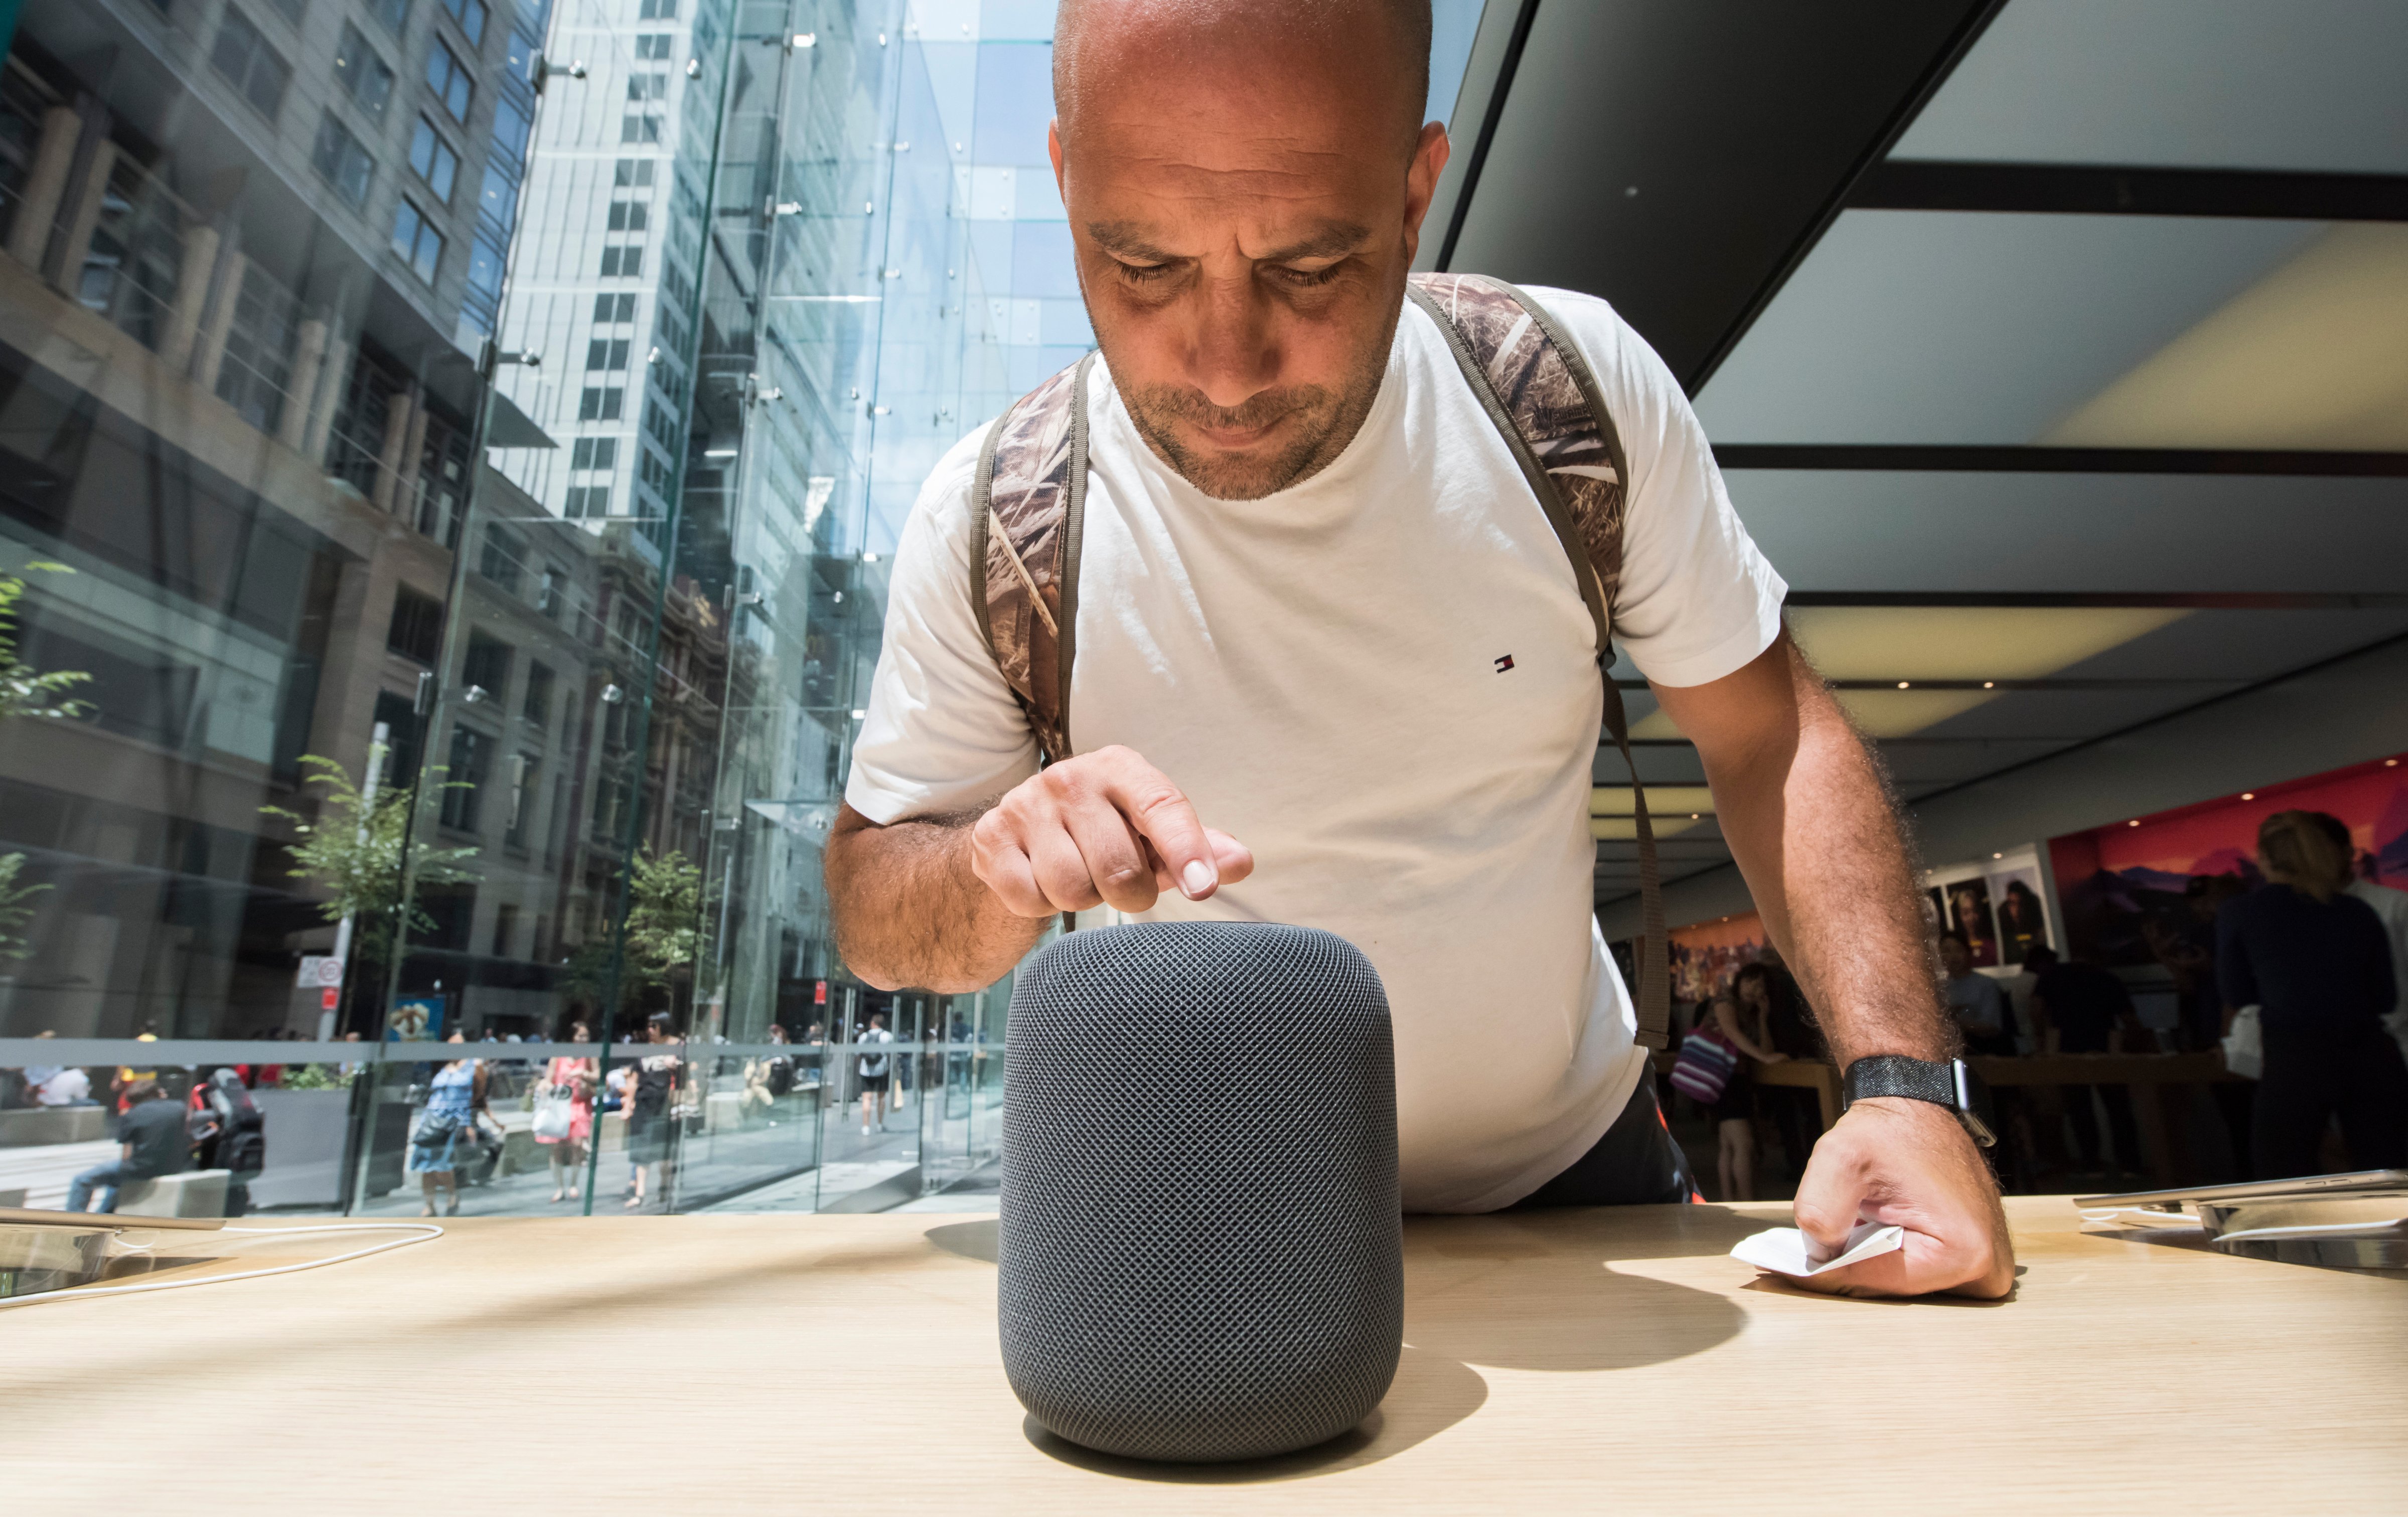 Customers interacting with the new product at the launch of the HomePod at the Apple Store on February 9, 2018 in Sydney, Australia. (James D. Morgan—Getty Images)